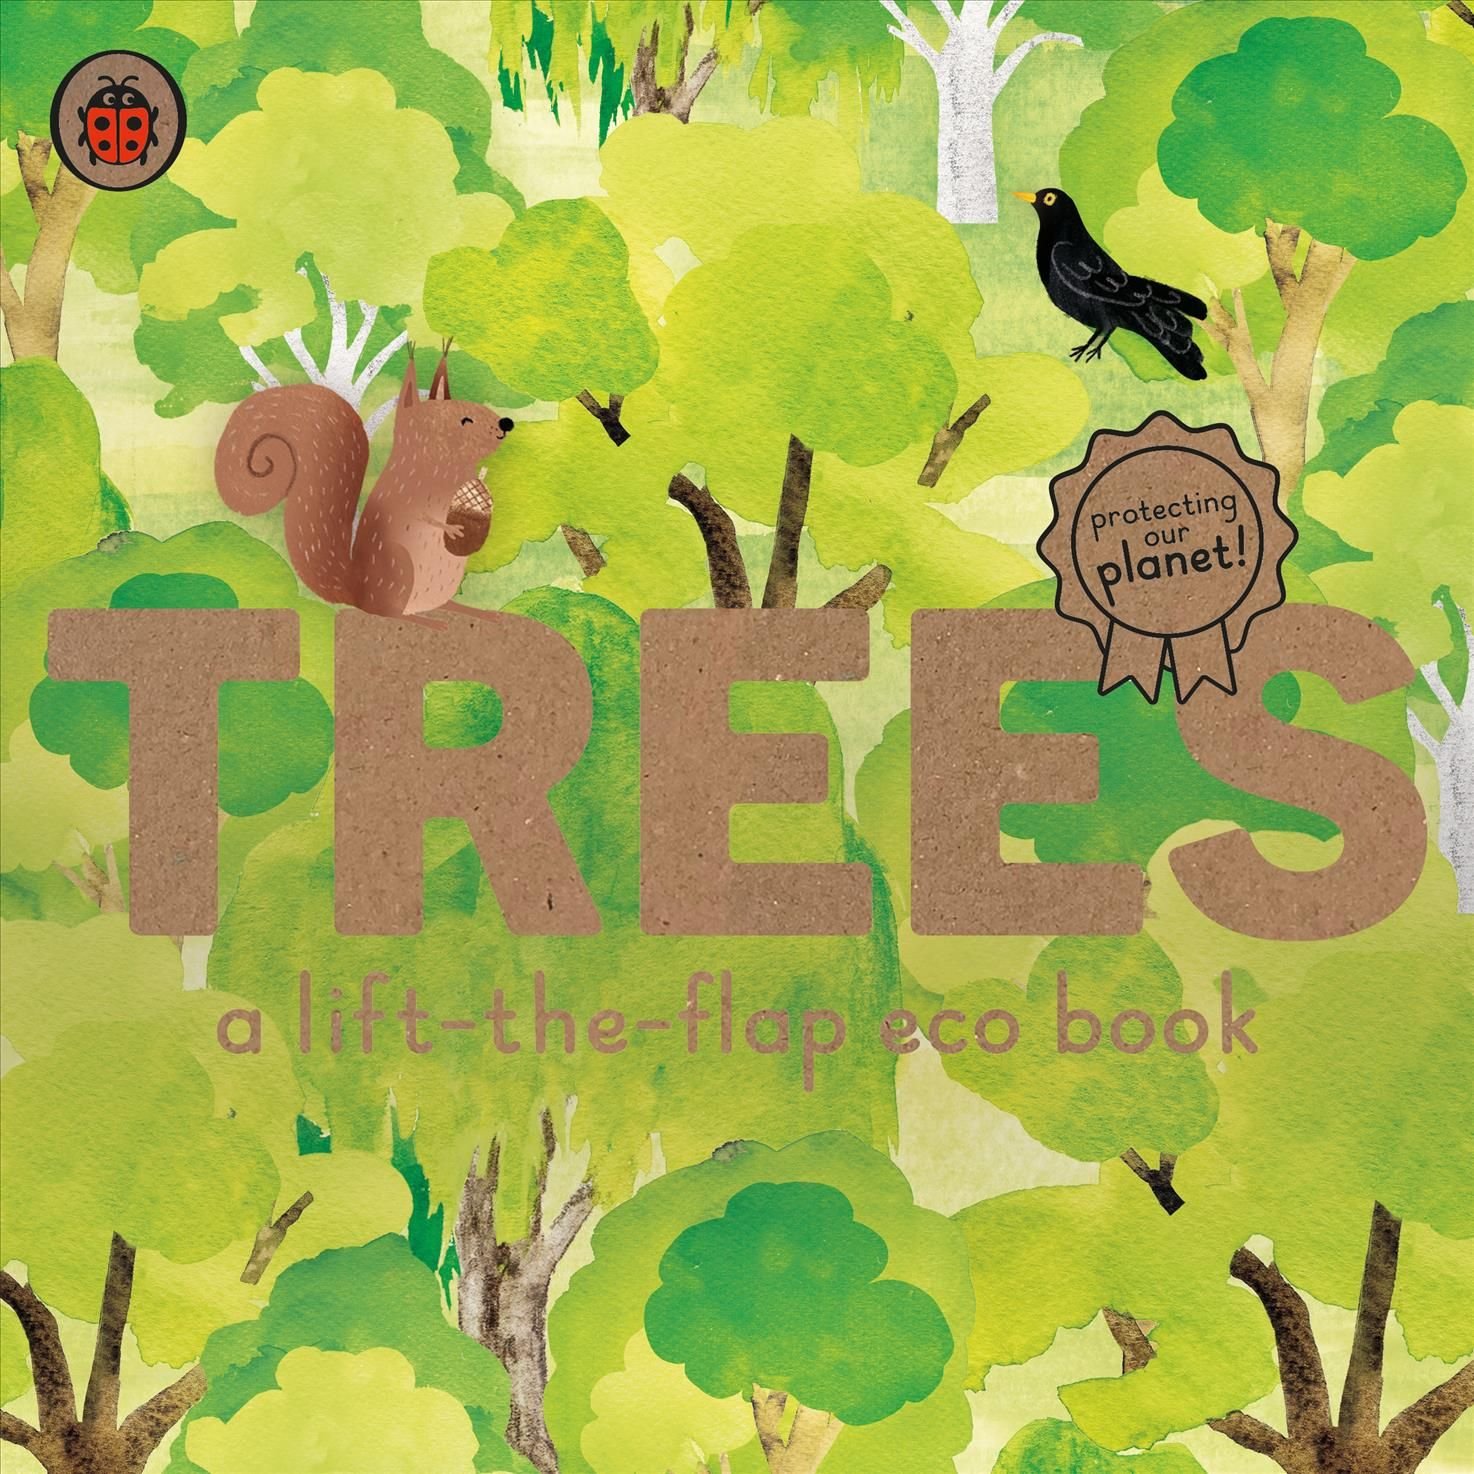 Buy　lift-the-flap　Free　book　Trees:　A　eco　With　by　Carmen　Saldana　Delivery